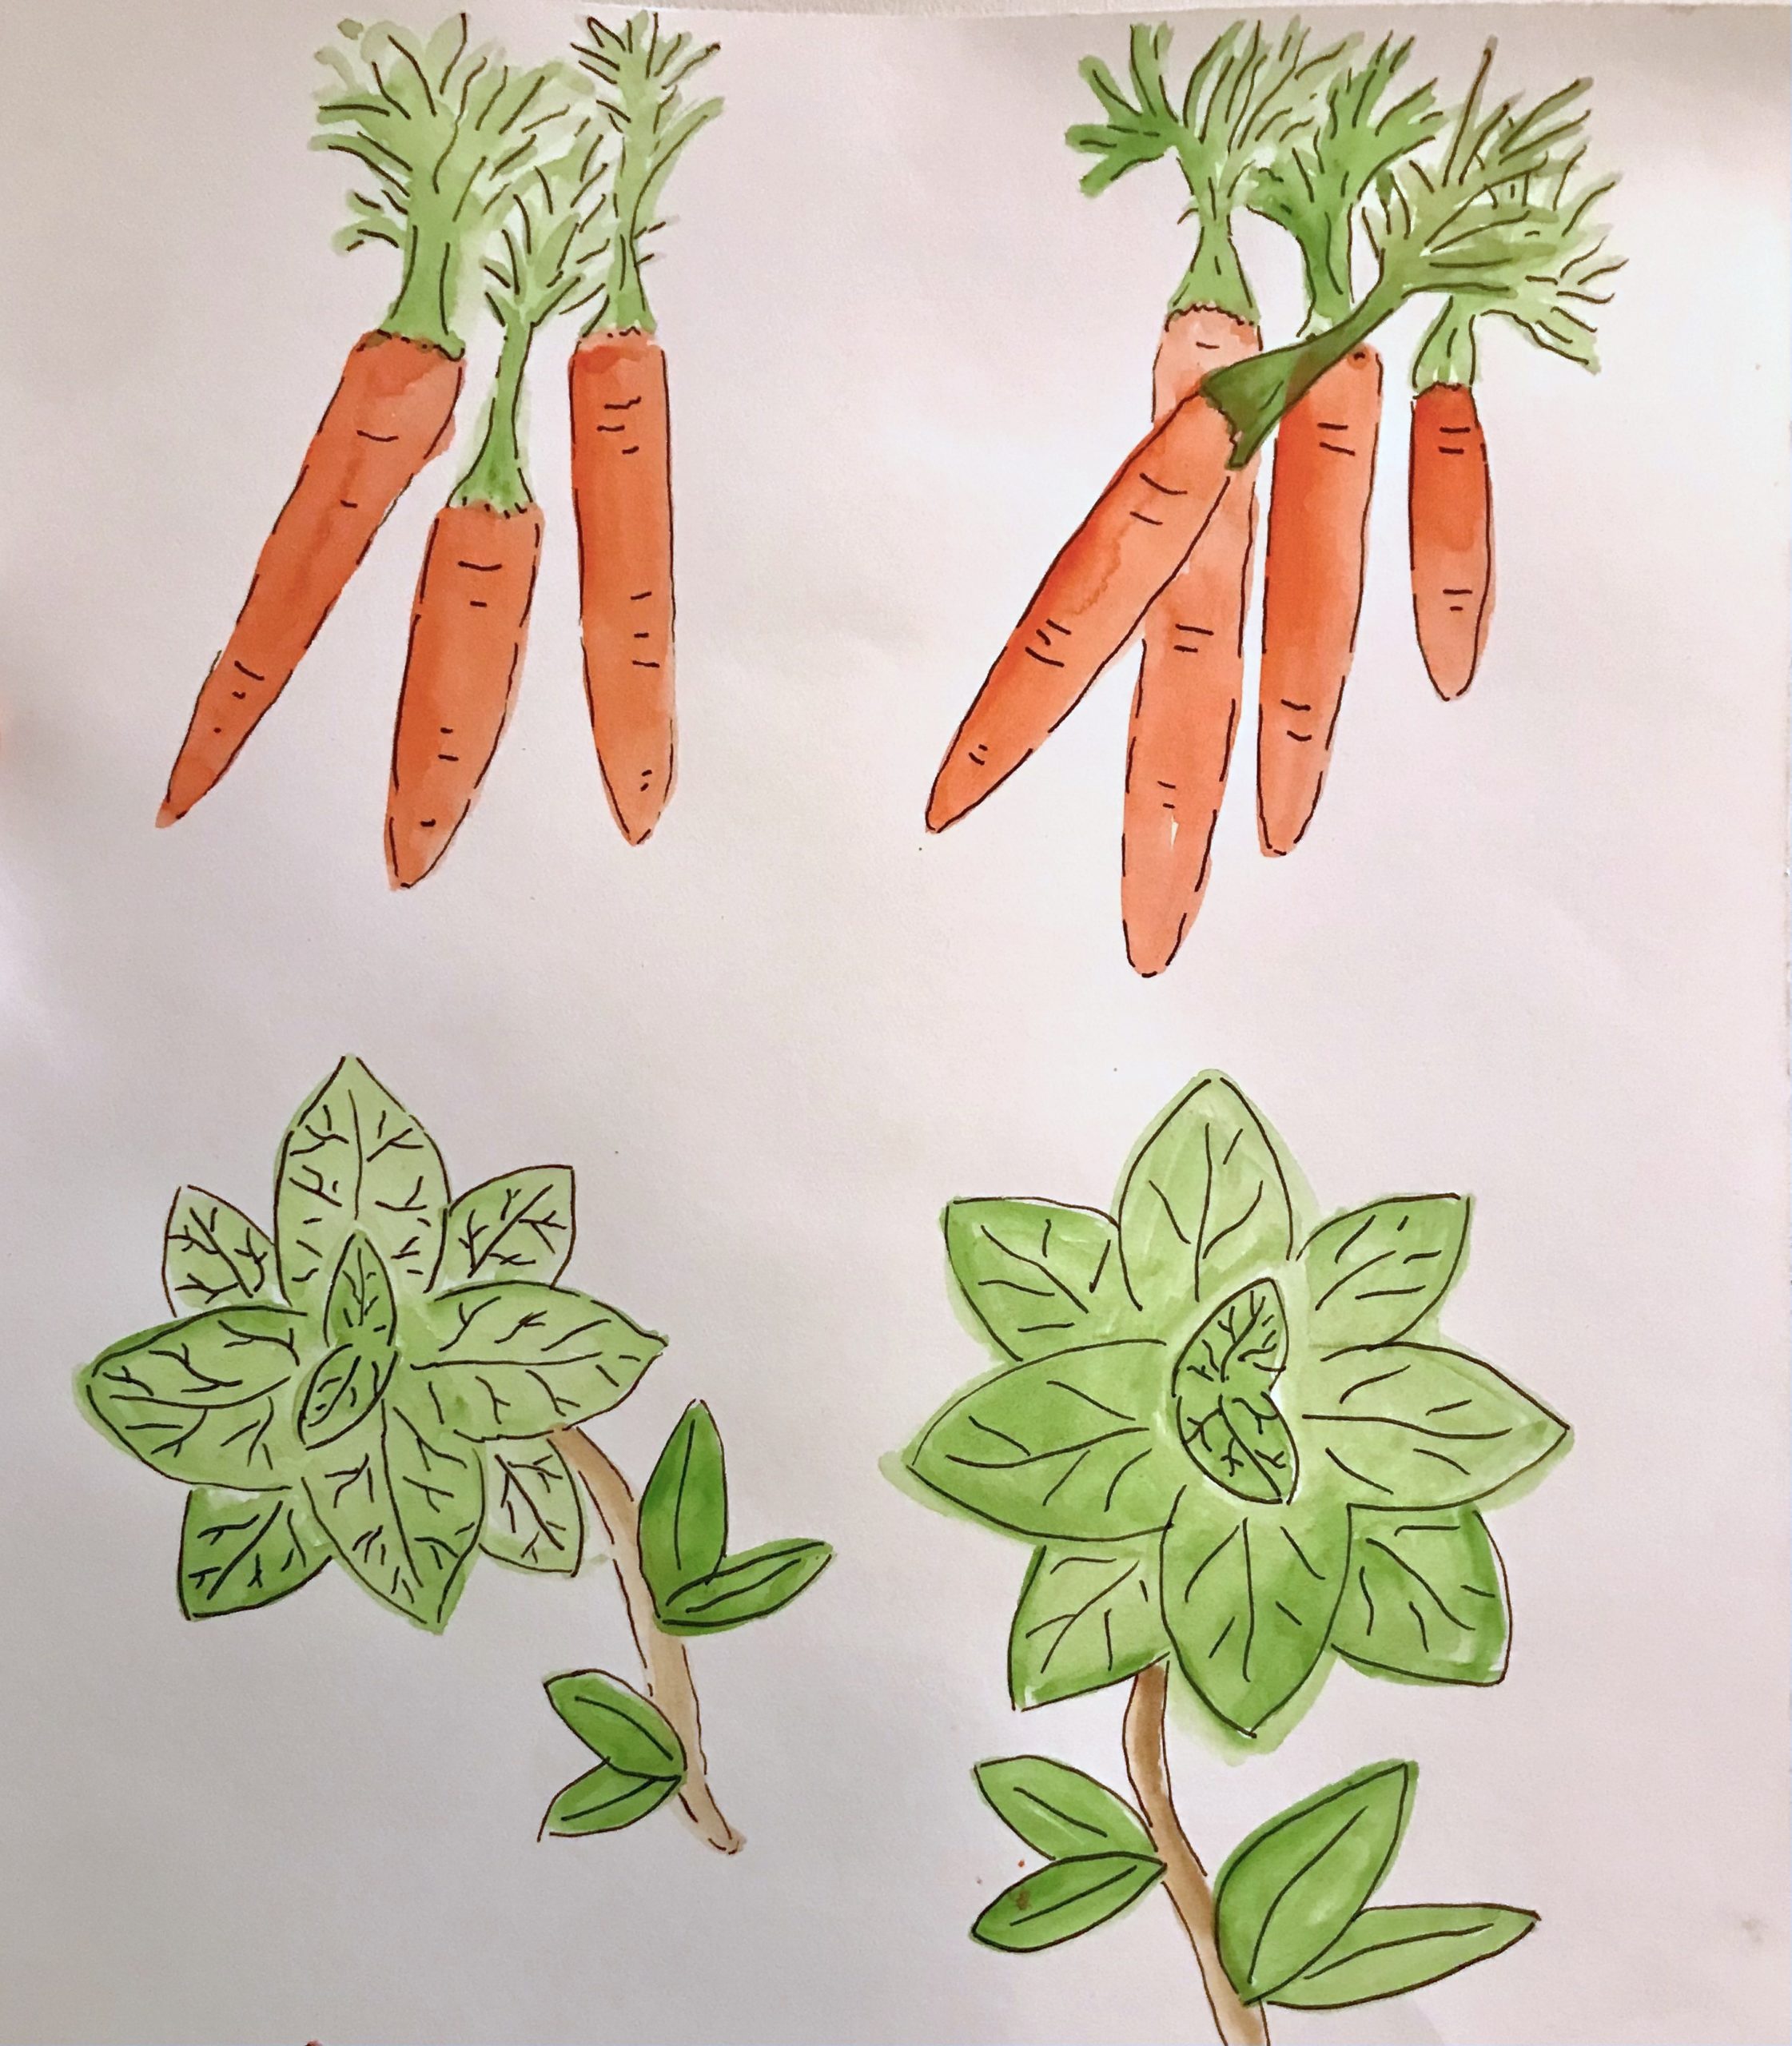 Drawings of carrots and mint by Robin Campbell